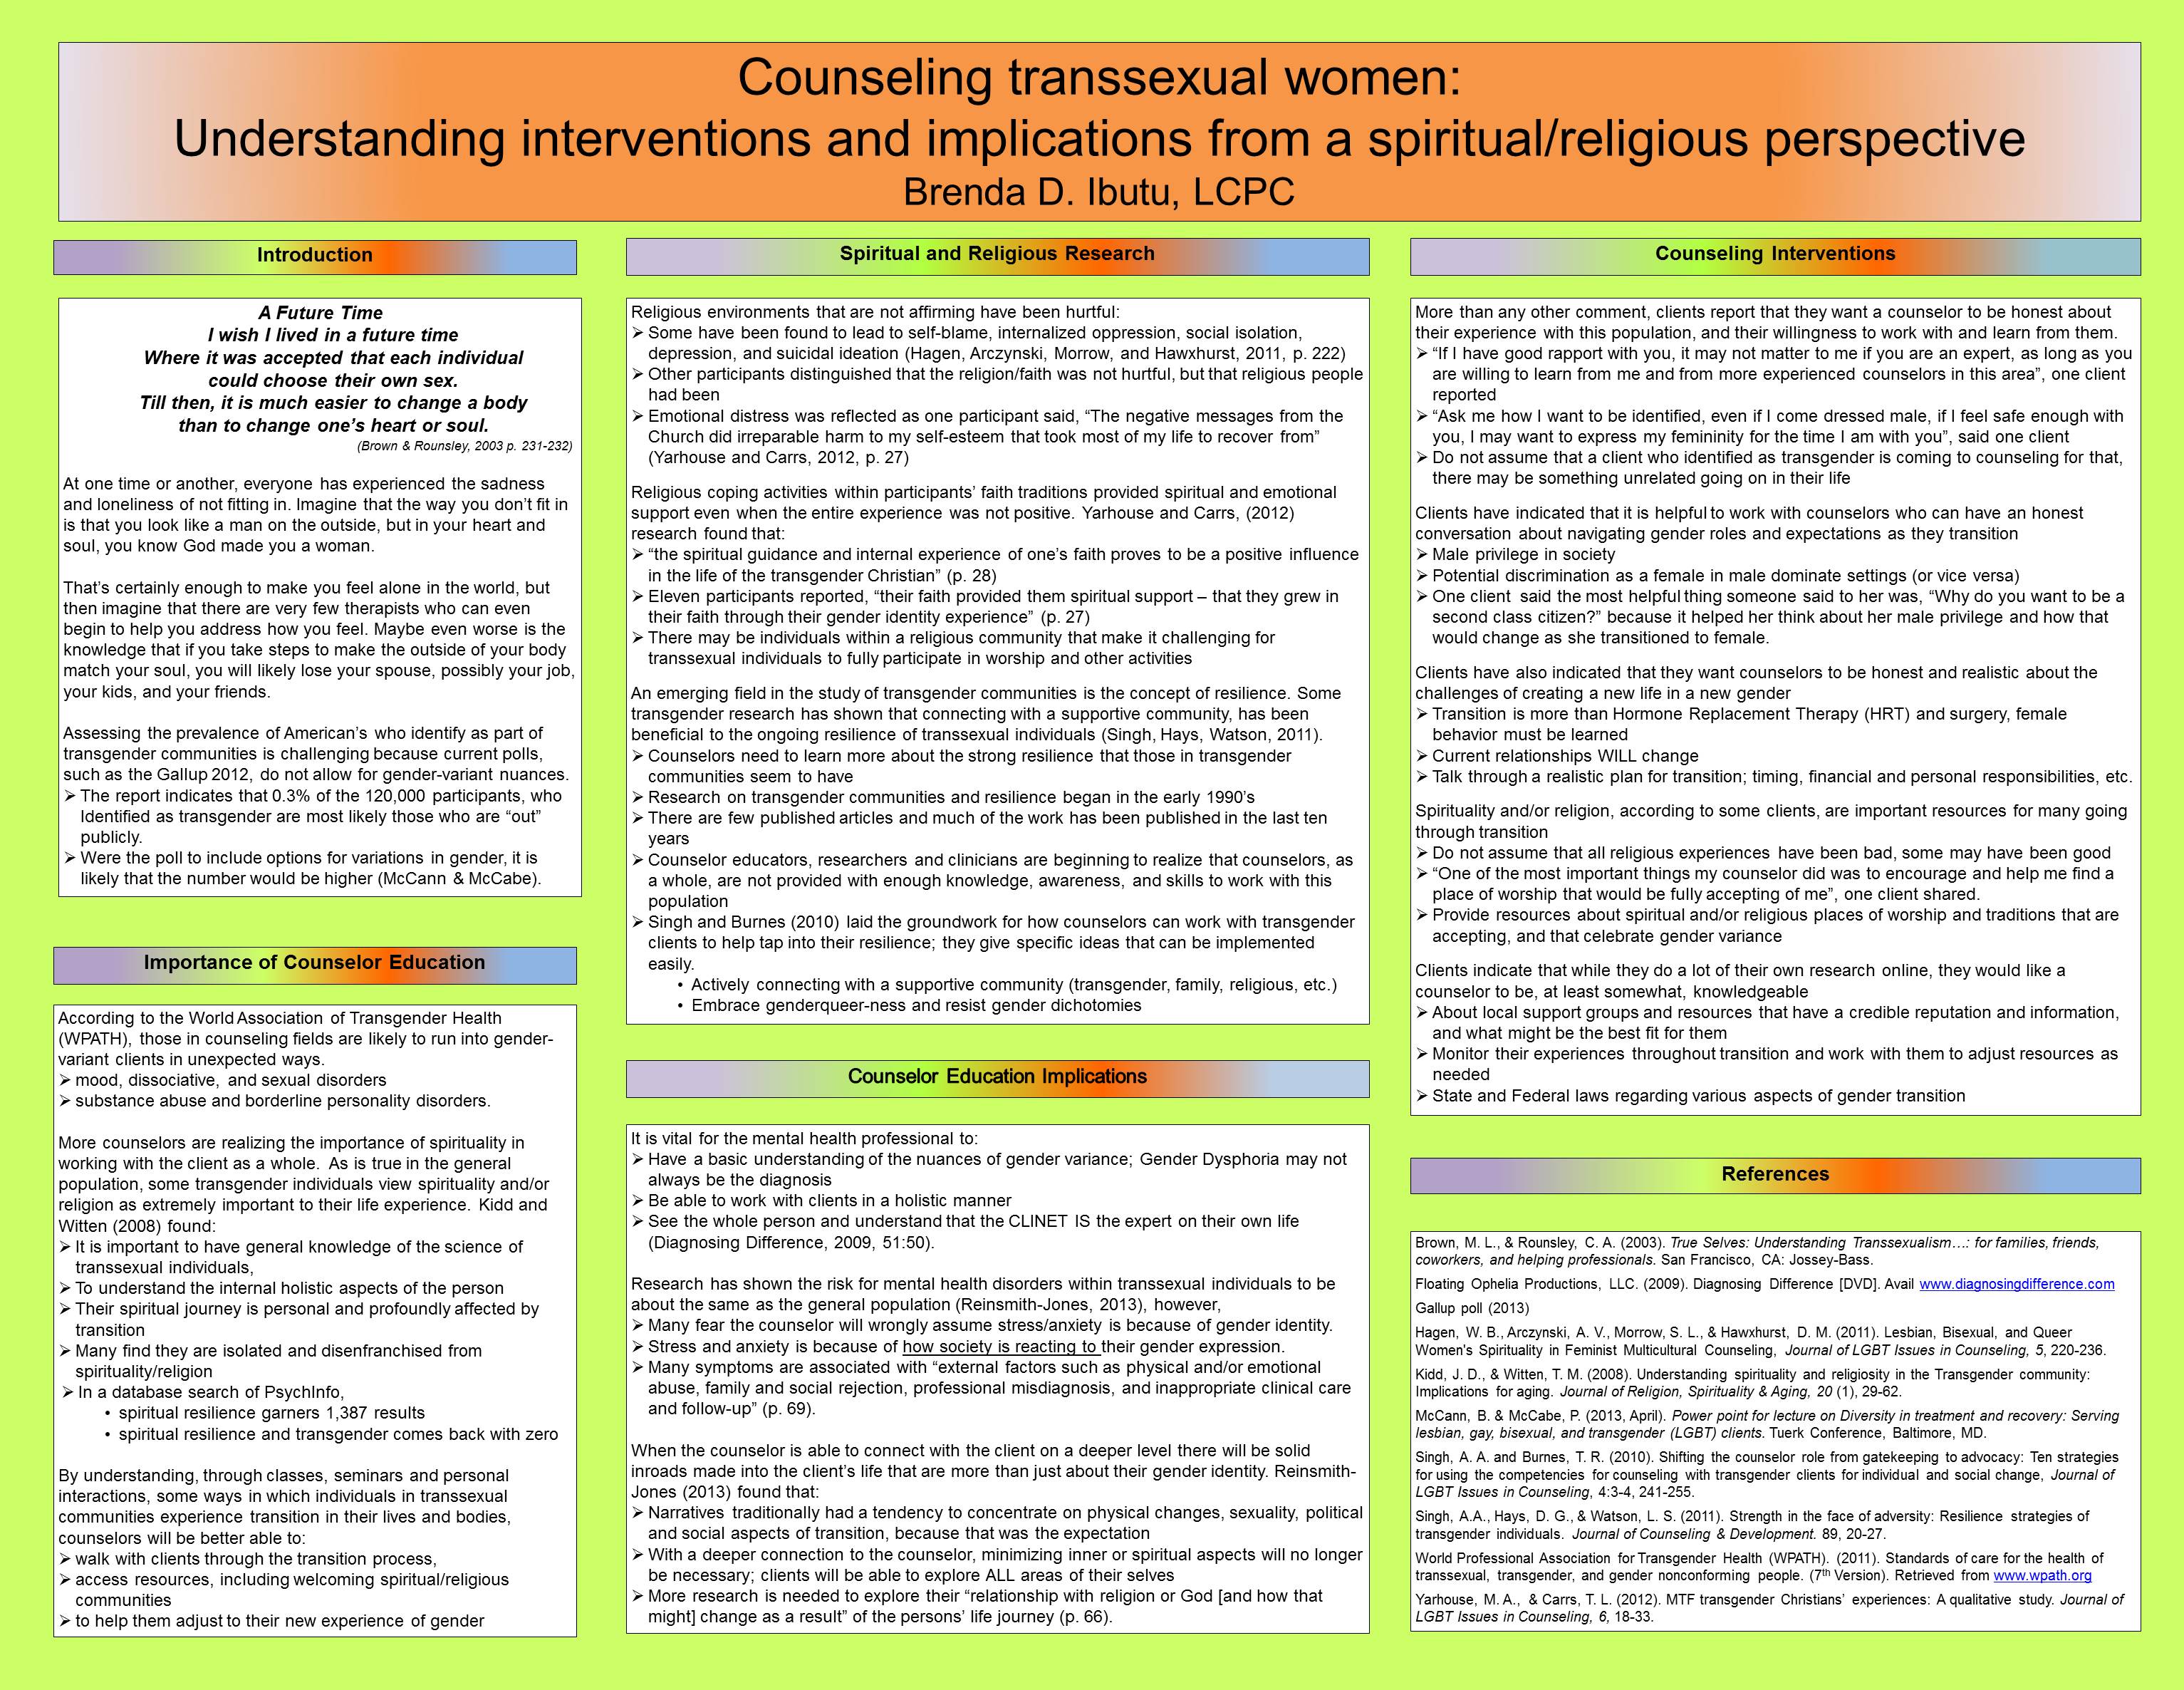 poster image: 'Counseling transsexual women: Understanding interventions and implications from a spiritual/religious perspective'